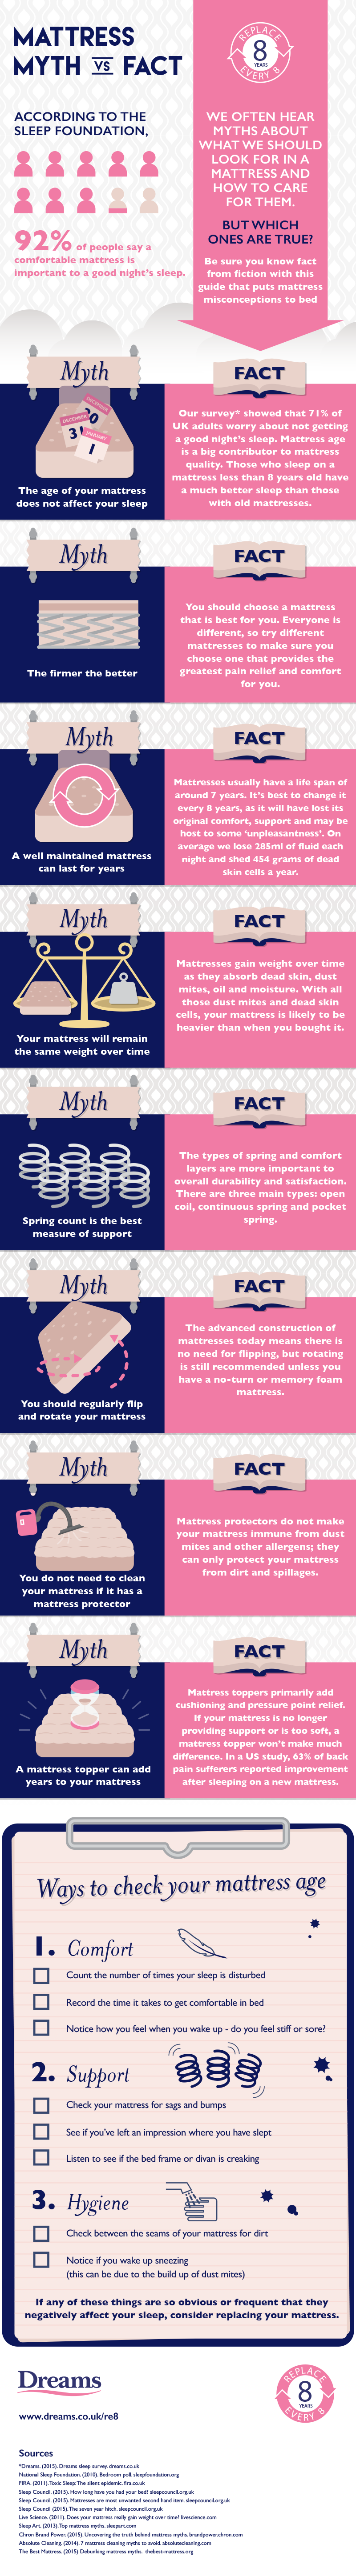 Myth vs Fact: The Science Behind Your Ageing Mattress, an infographic from The Sleep Matters Club.